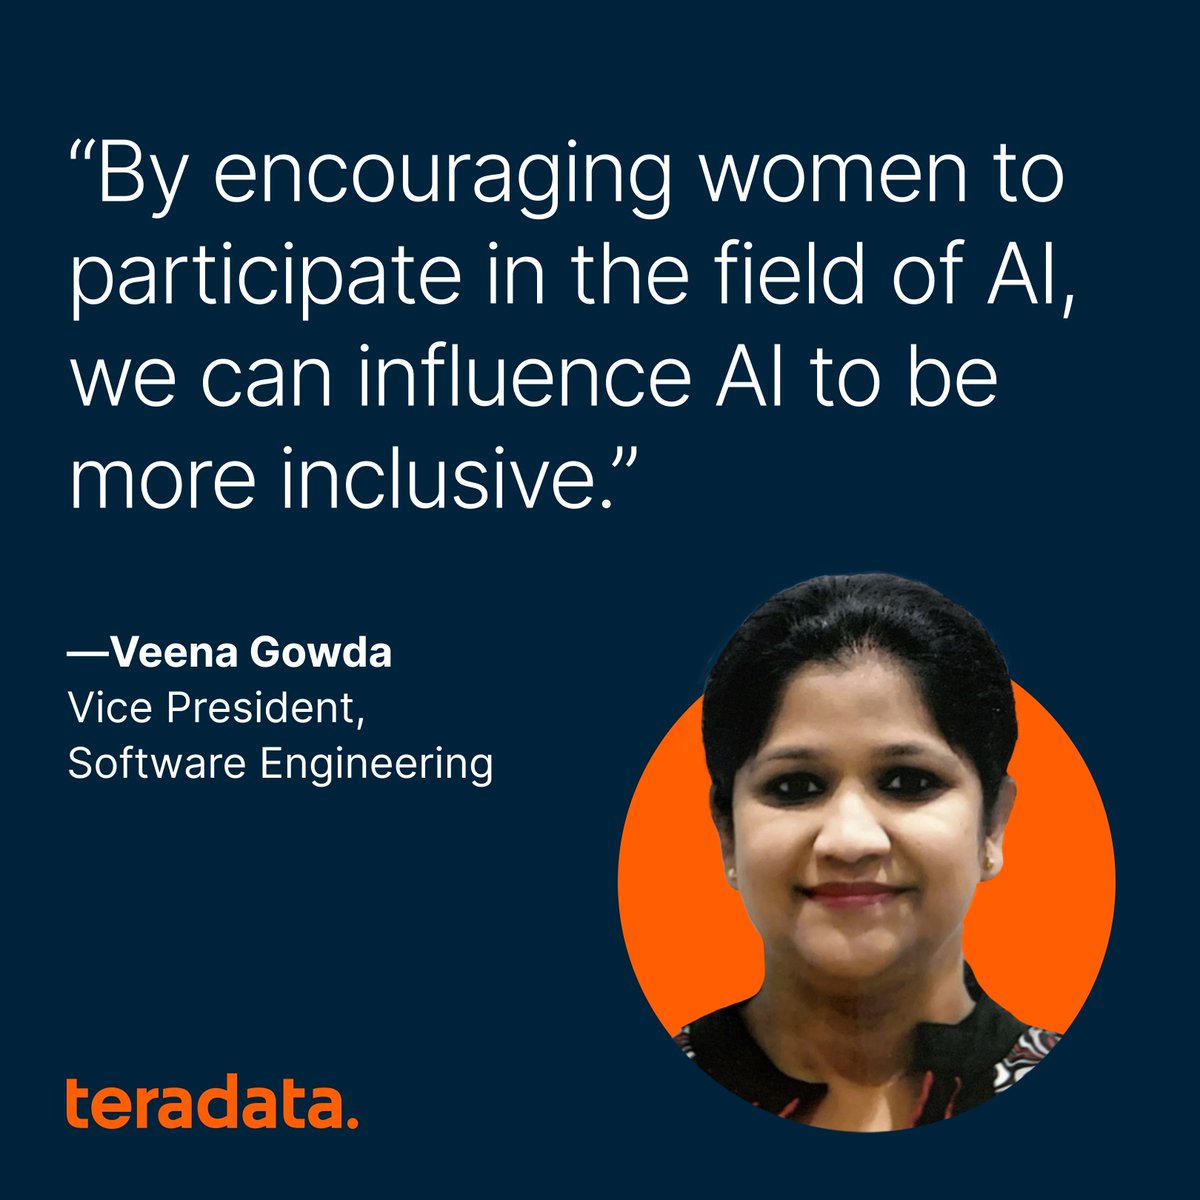 The choices we make today will shape the world we live in tomorrow -- and at this historic time, we're grateful to Veena Gowda and all the women of Teradata striving to make AI technology equitable and inclusive. Let's continue to make history together. #WomensHistoryMonth